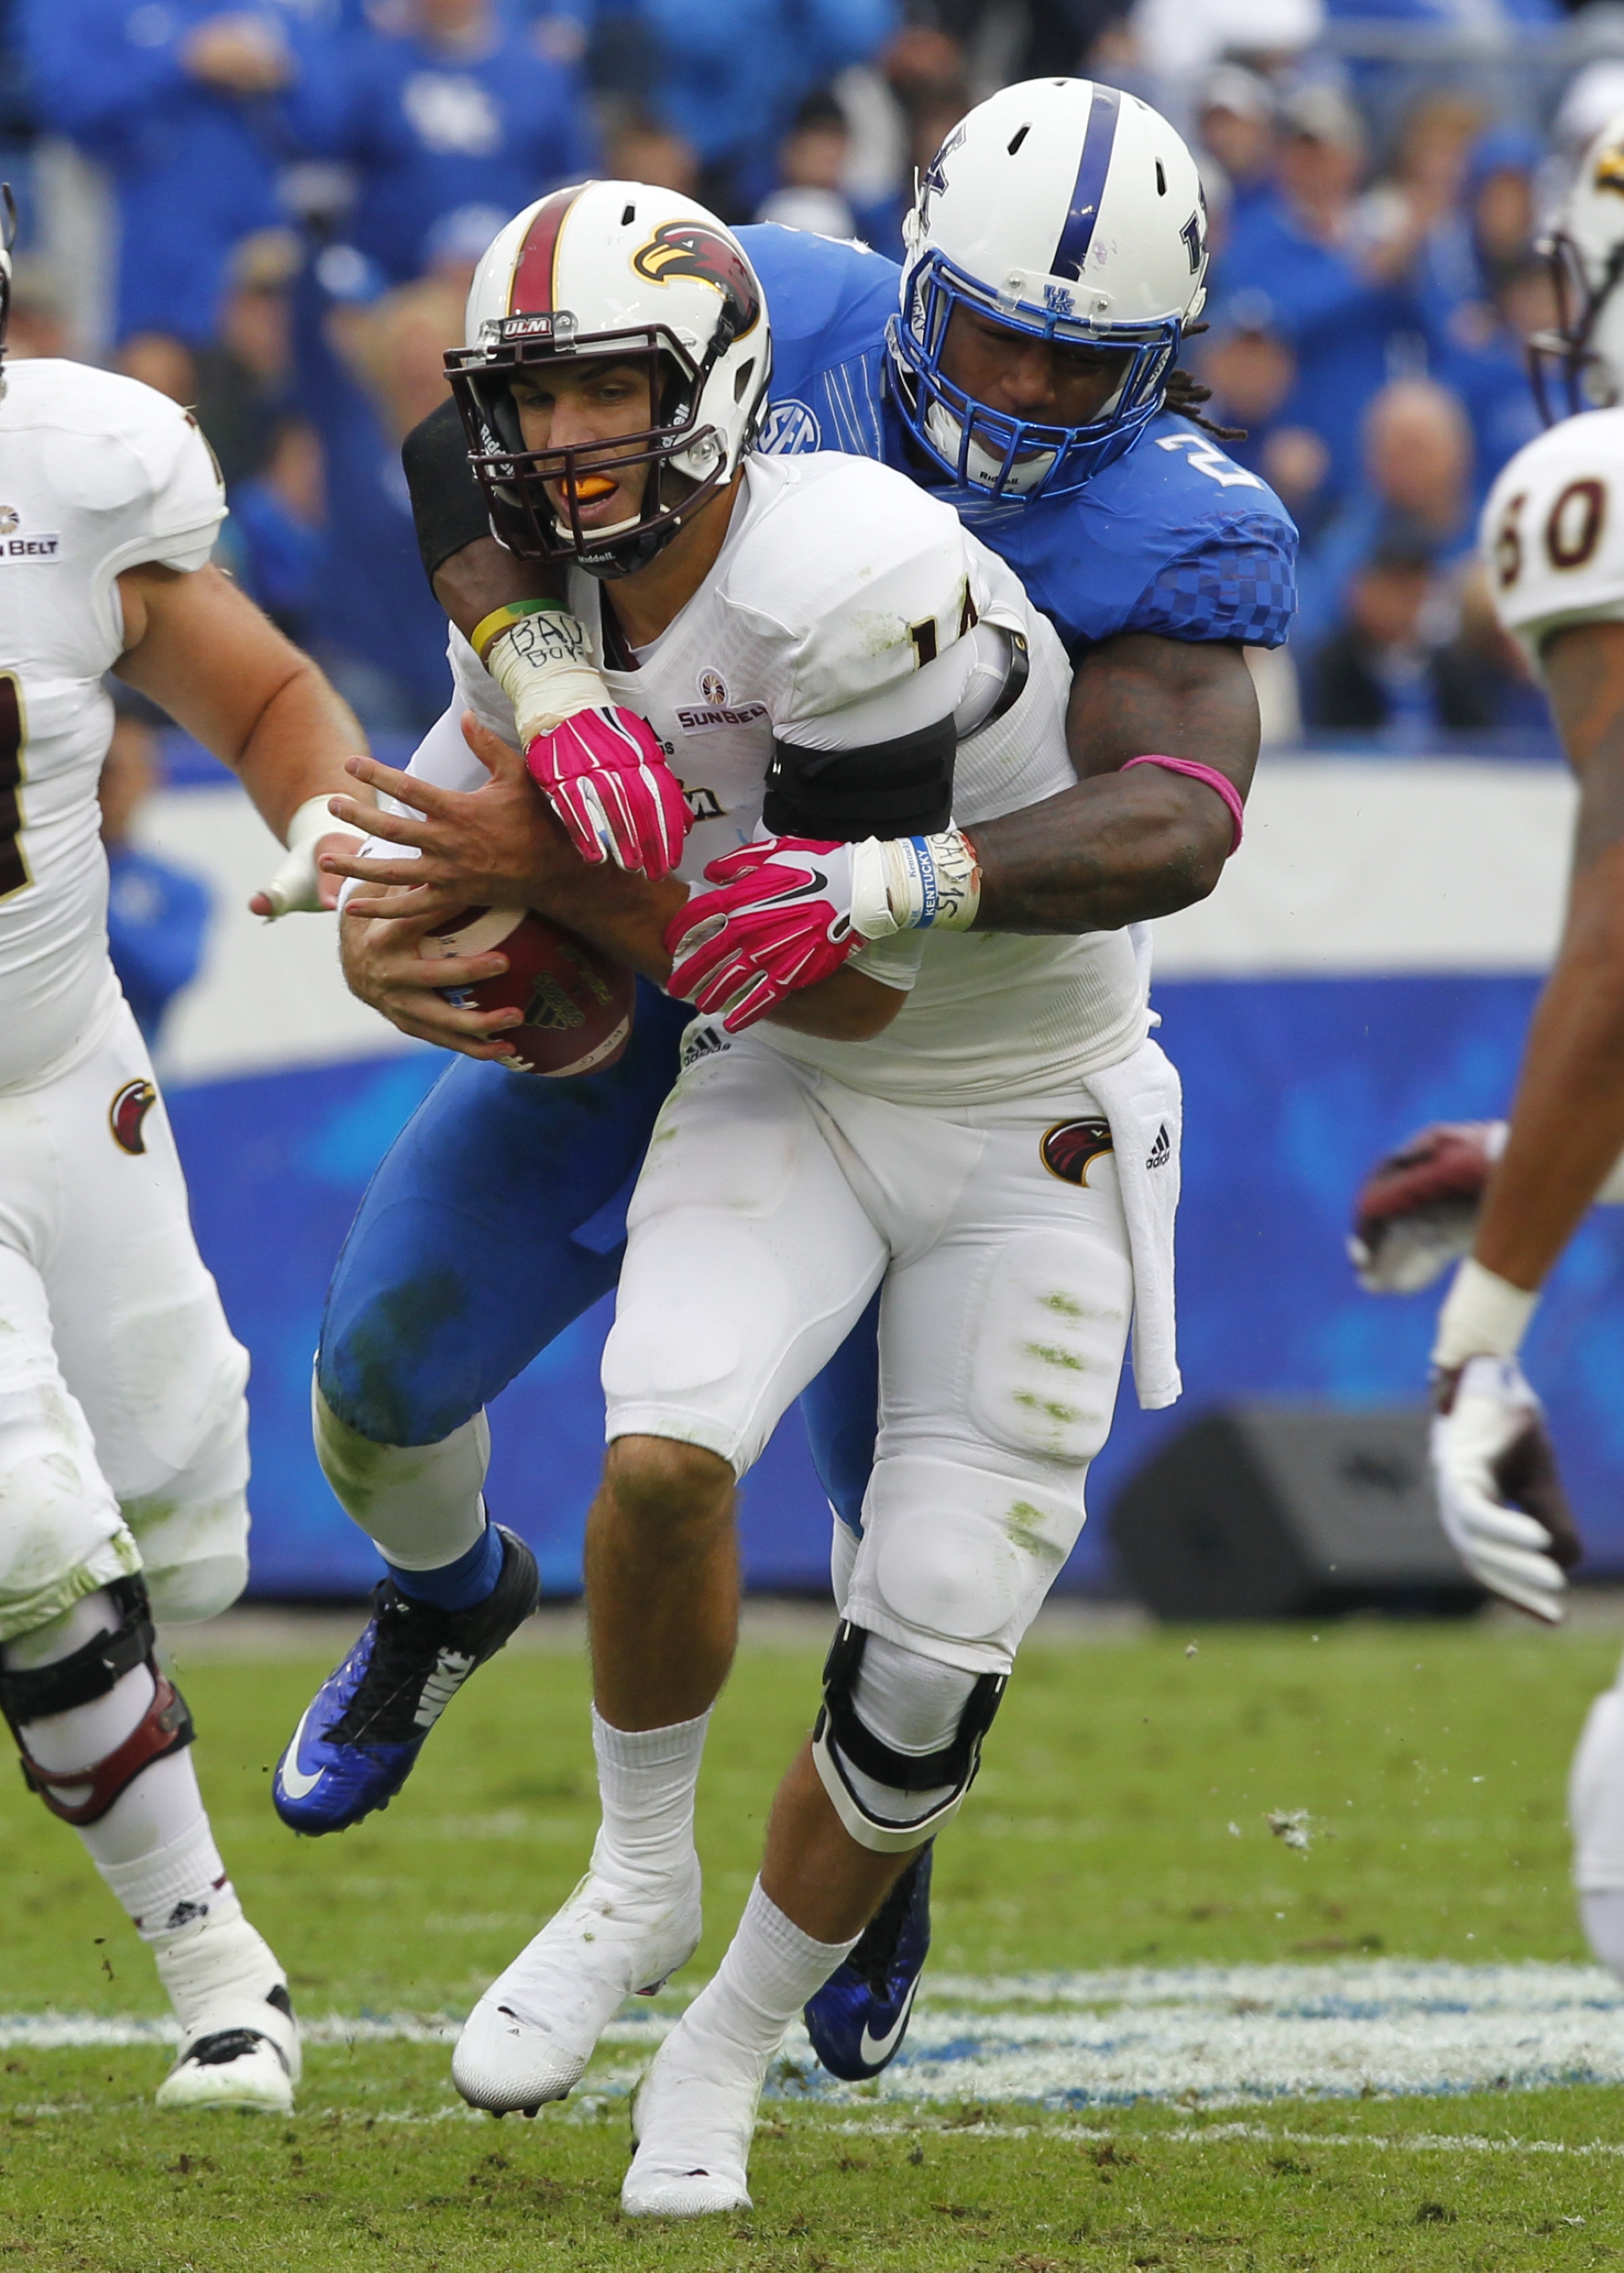 Alvin Bud  Dupree gets a sack (Photo by John Sommers II/Getty Images)